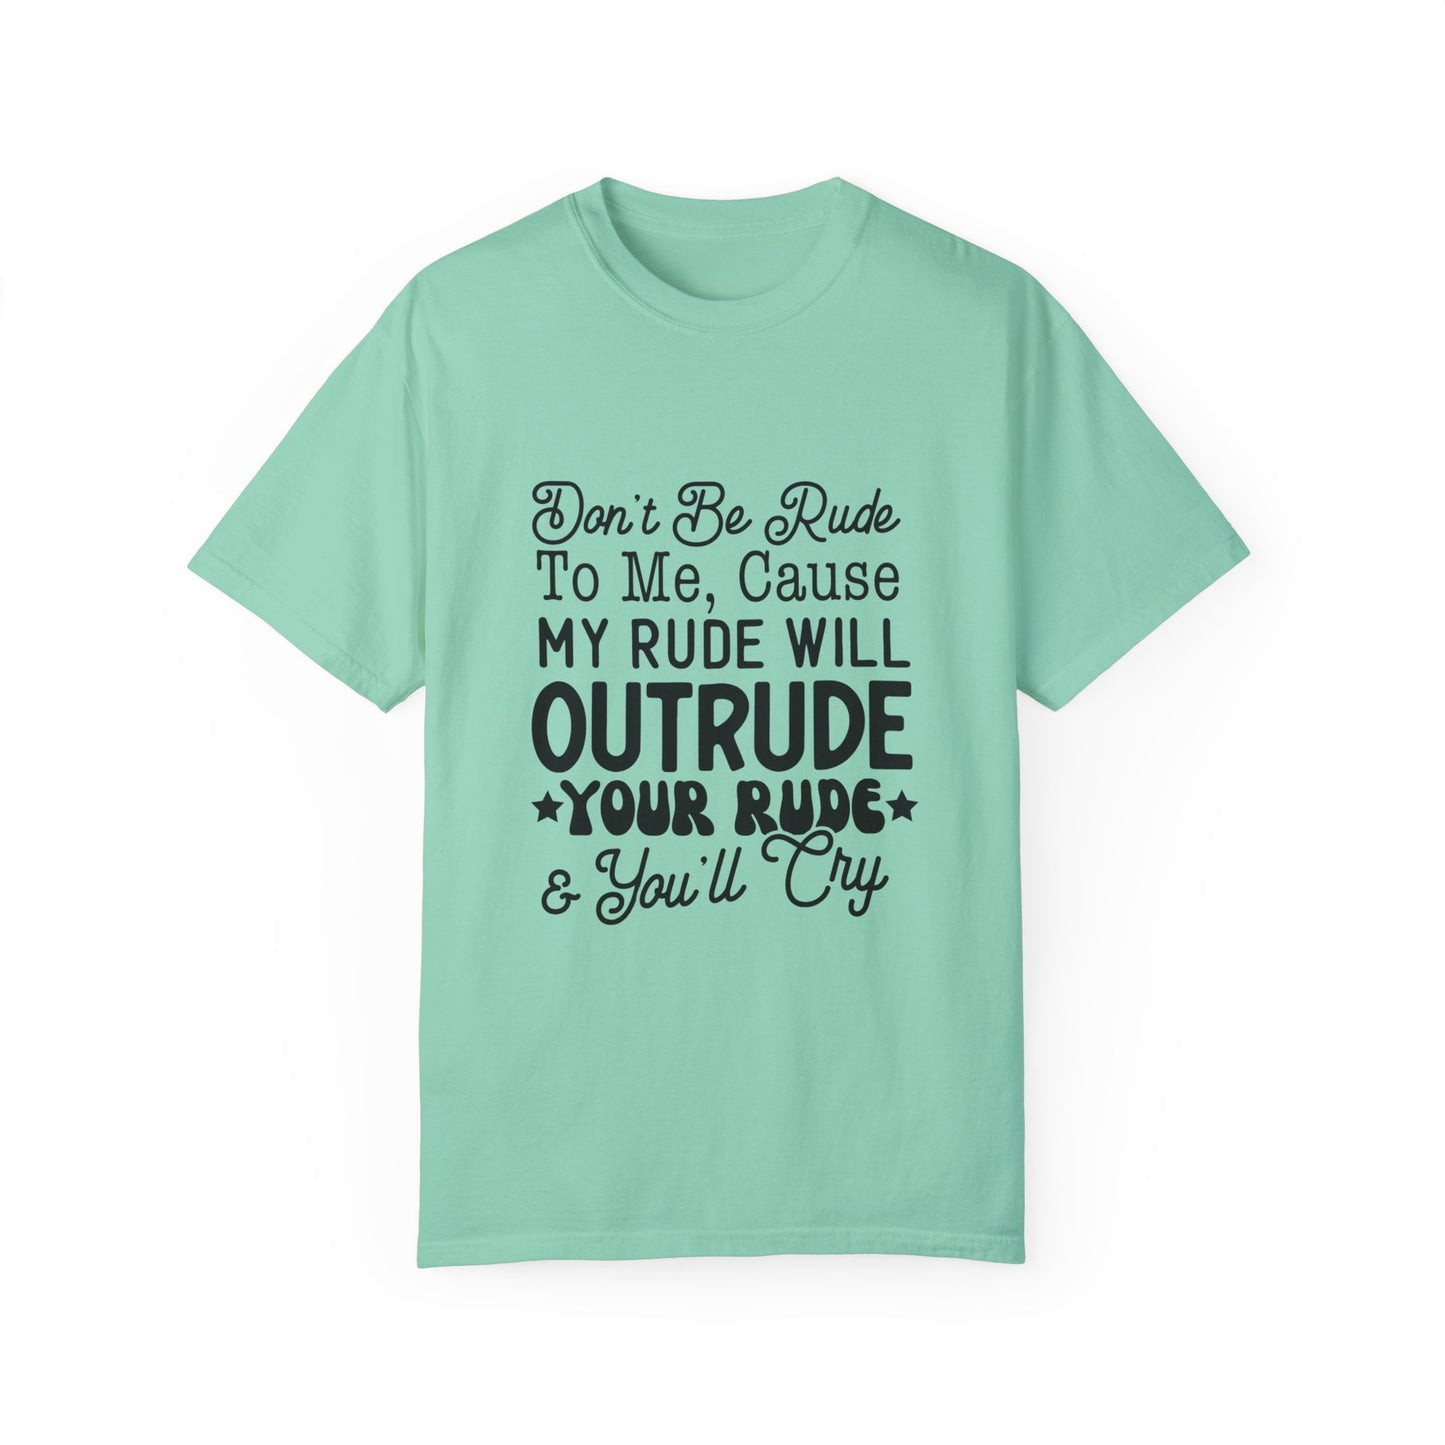 Don't be rude - Unisex Garment-Dyed T-shirt